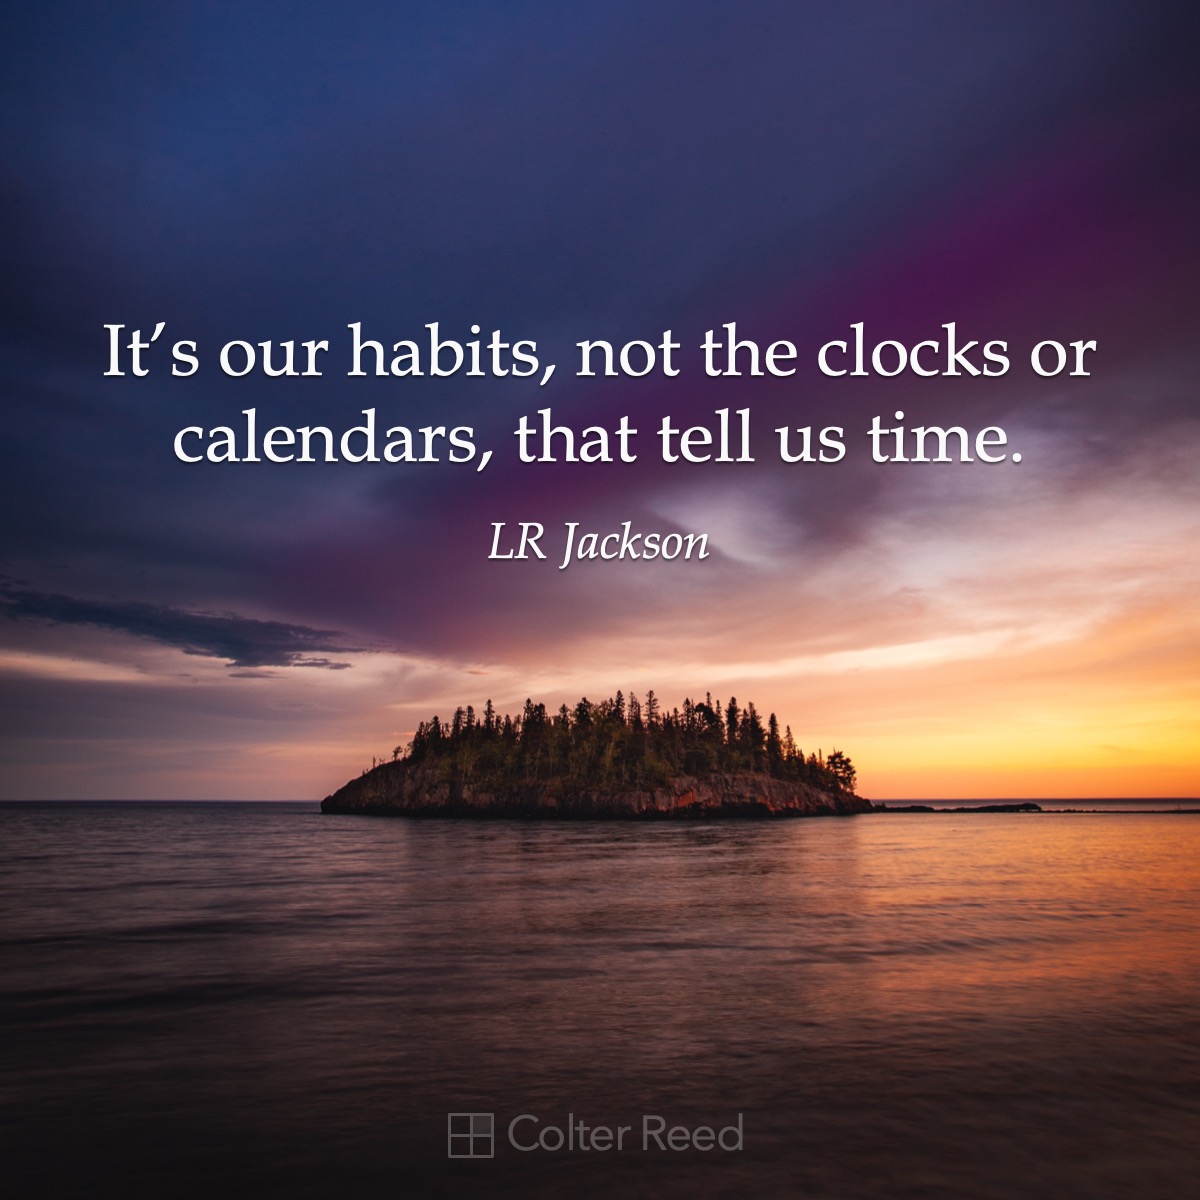 It’s our habits, not the clocks or calendars, that tell us time. —LR Jackson